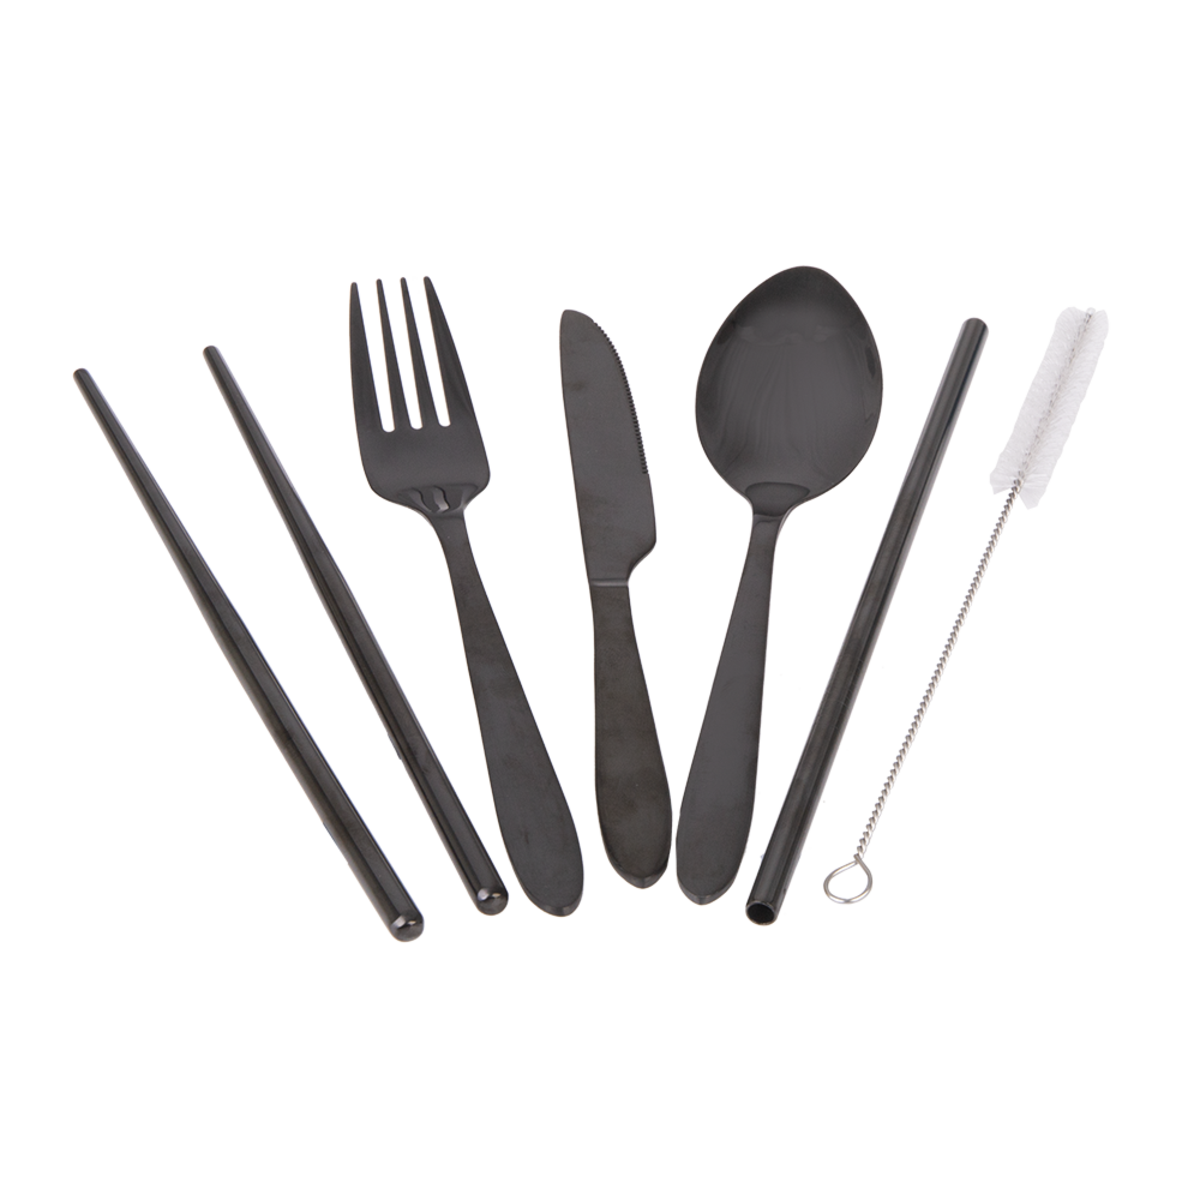 APPETITO 6 PIECE STAINLESS STEEL TRAVELLER'S CUTLERY SET - BLACK